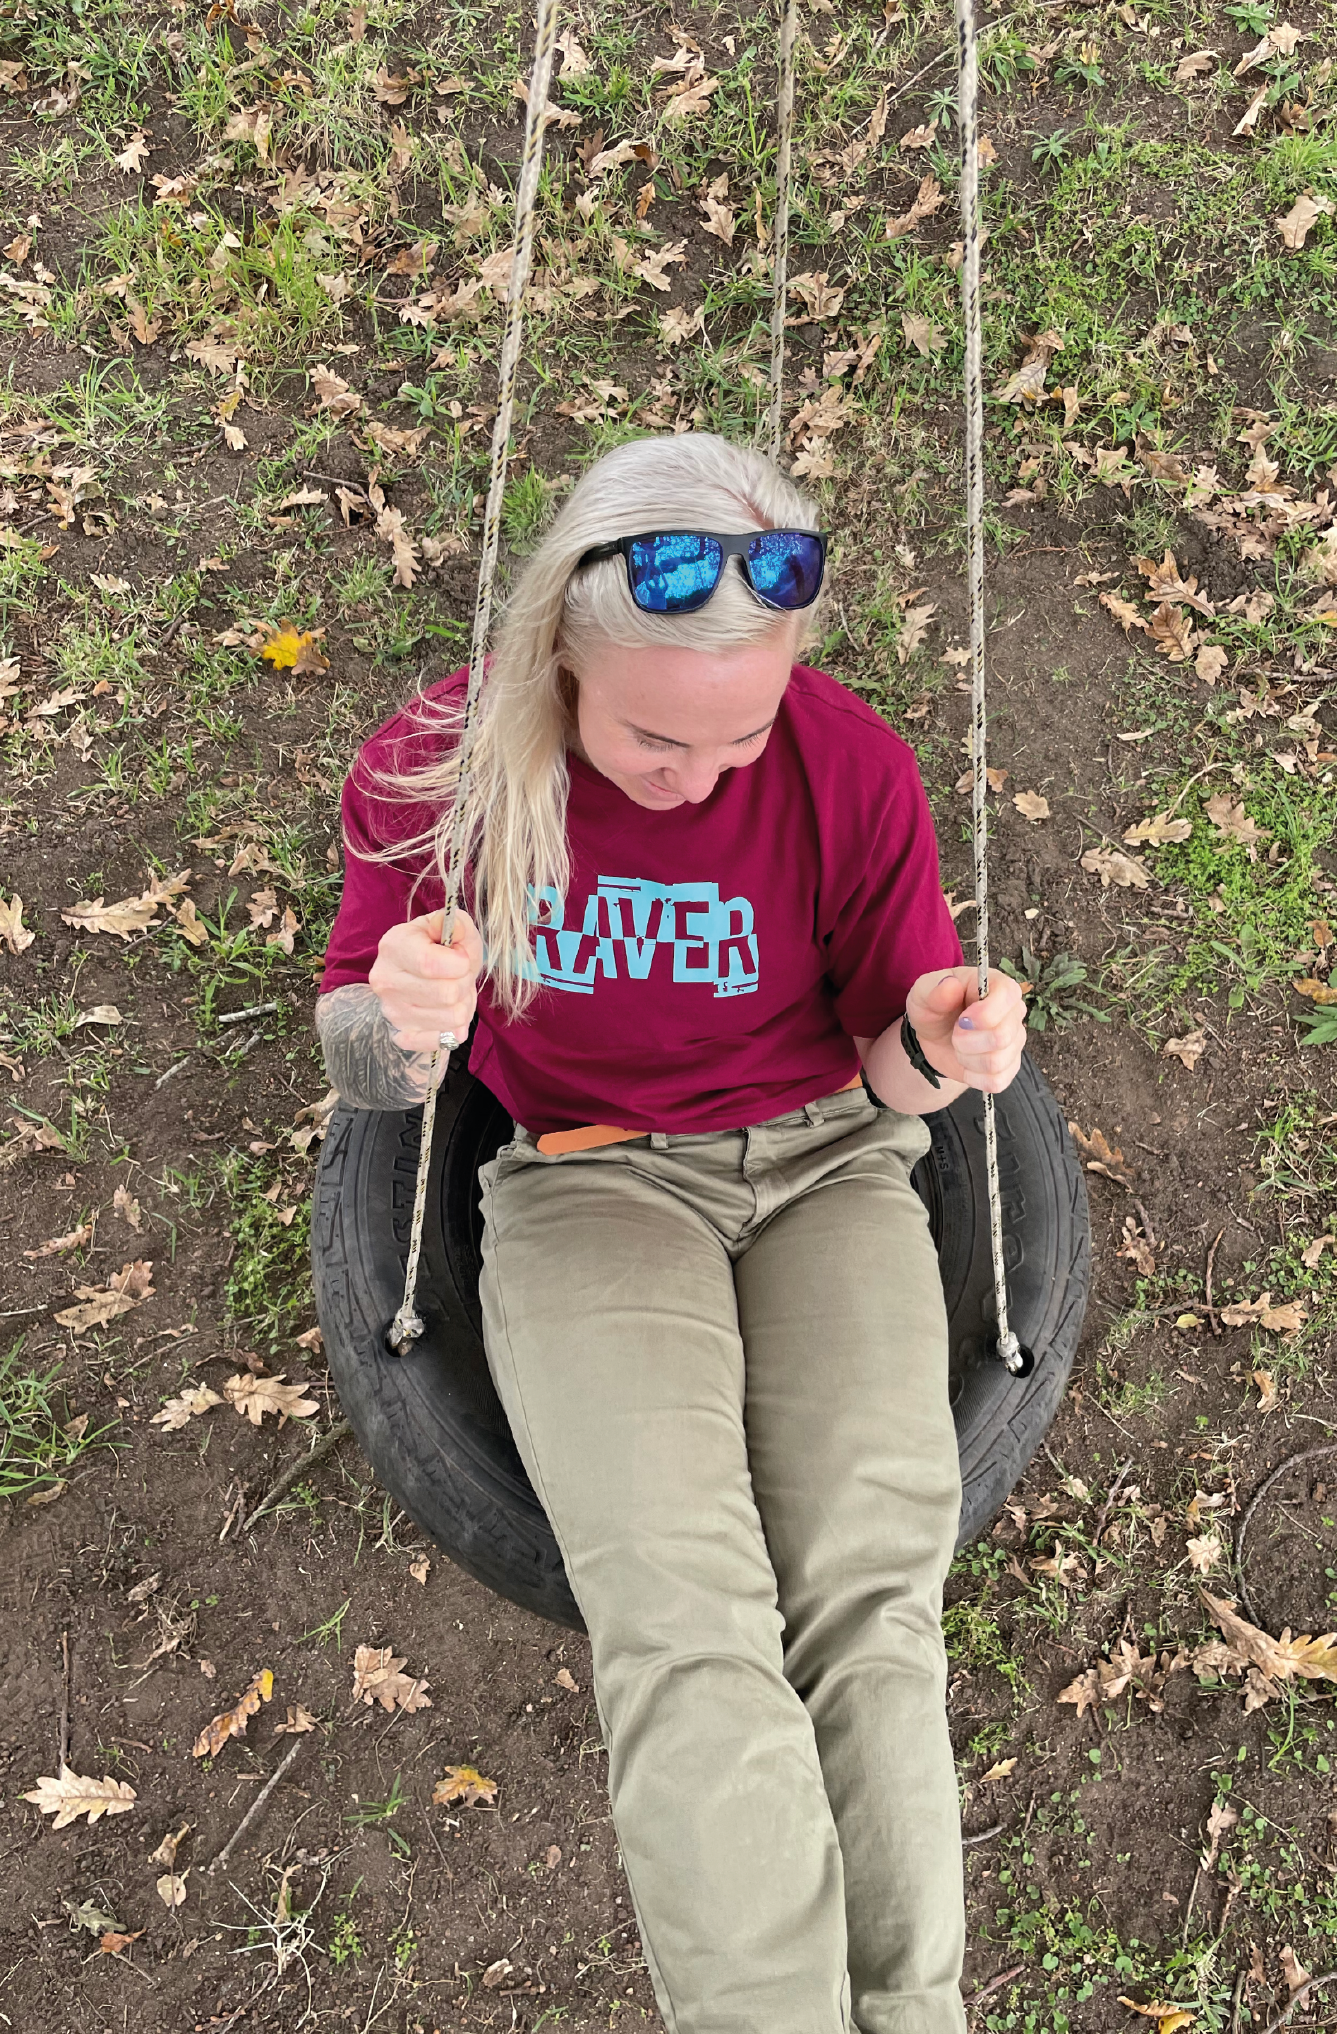 Women on a tyre swing wearing cargo pants with a maroon crop top and sunglasses.